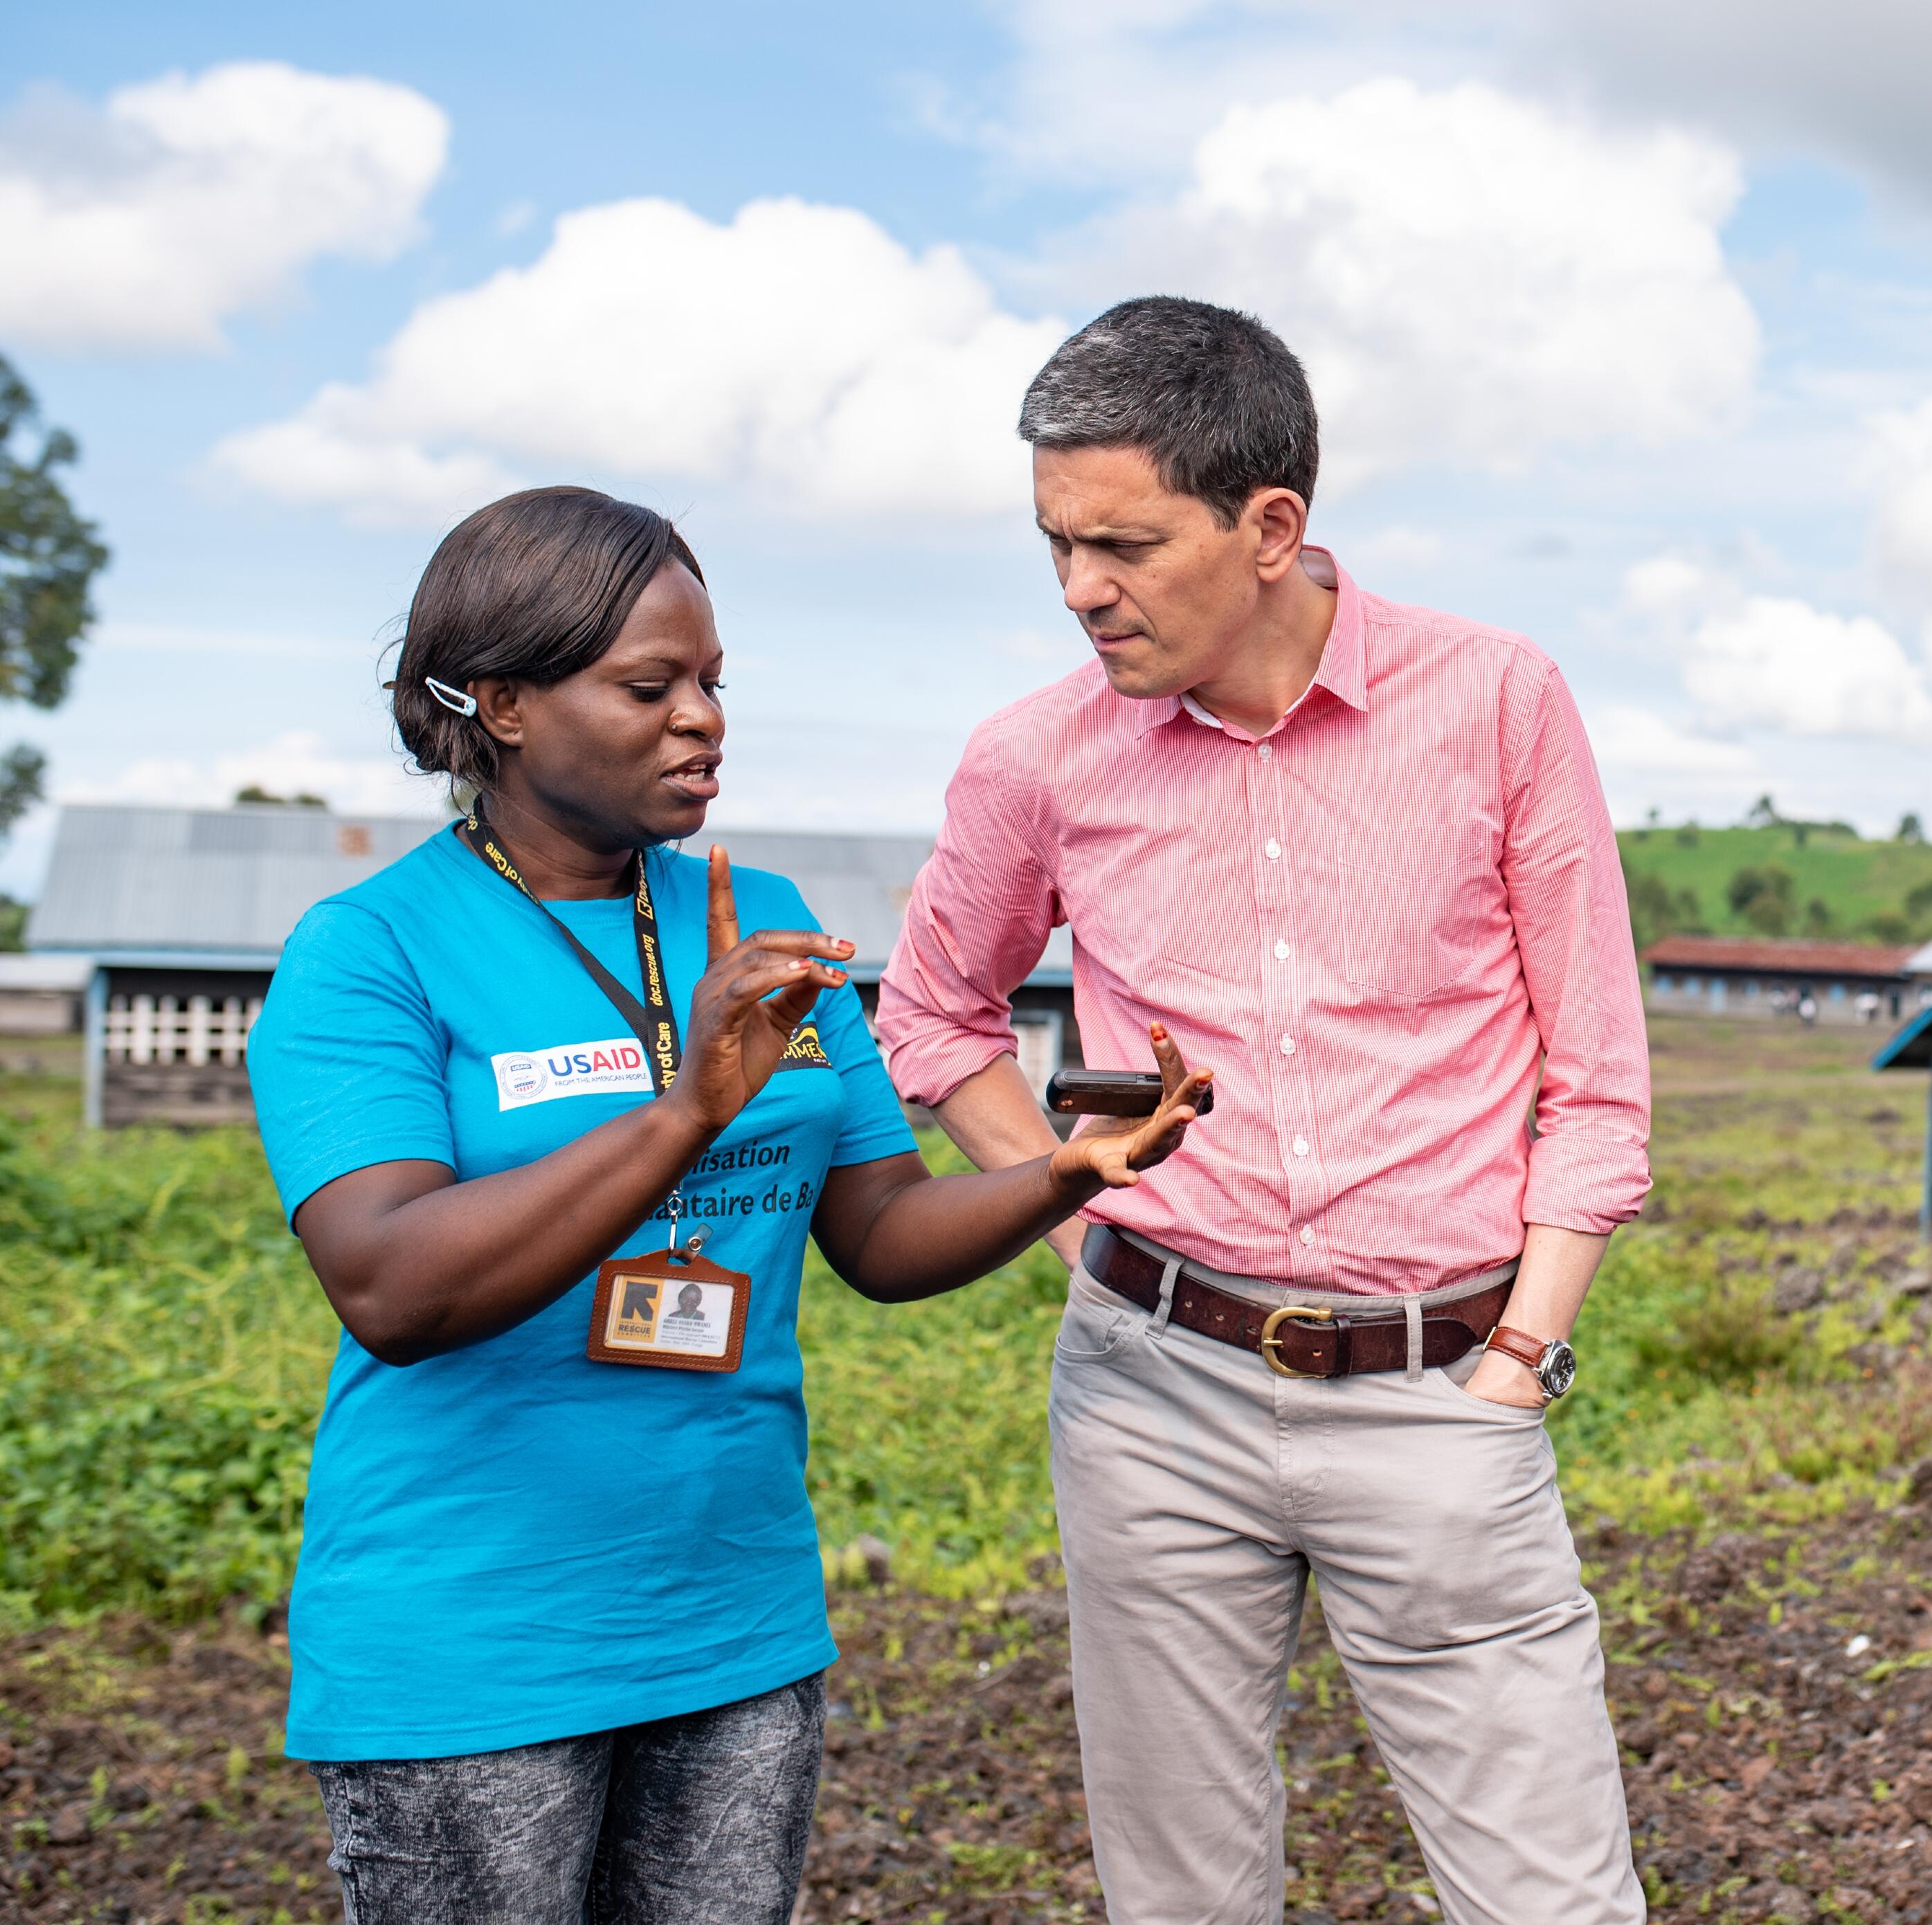 IRC president and CEO David Miliband speaks to an IRC staff member outside a community space where women take part in activities designed to support women and girls in Goma, Democratic Republic of Congo